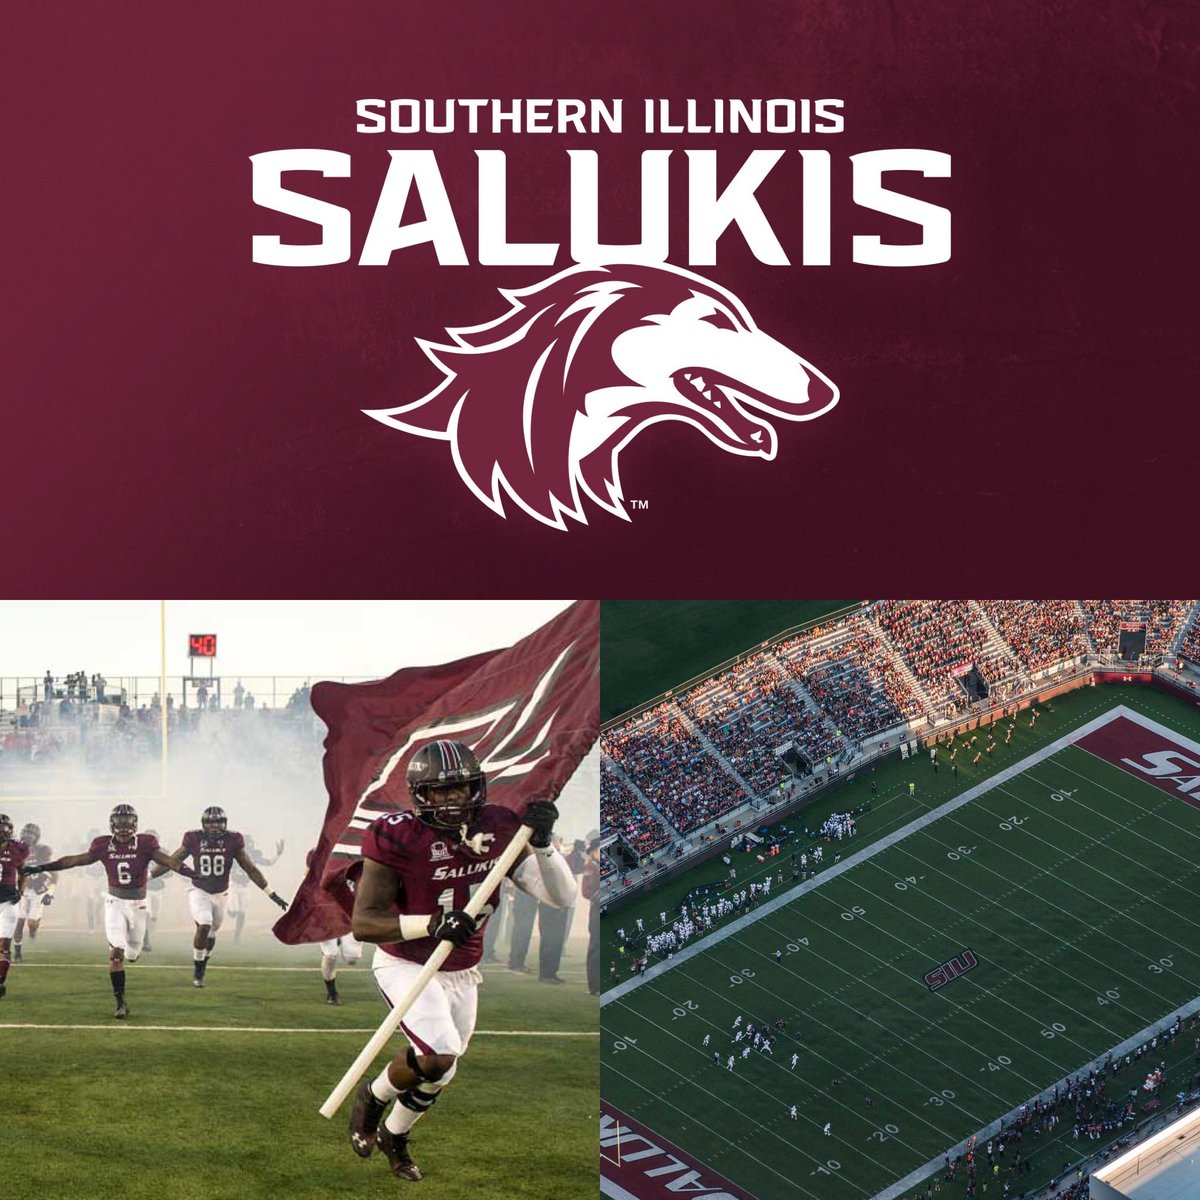 Blessed to receive my 9th Division 1 offer from @SIU_Football!!
#UnleashTheDawg @SIUC @TrevorOlson62 @coachrolan @MeadeSmith @17NickHill